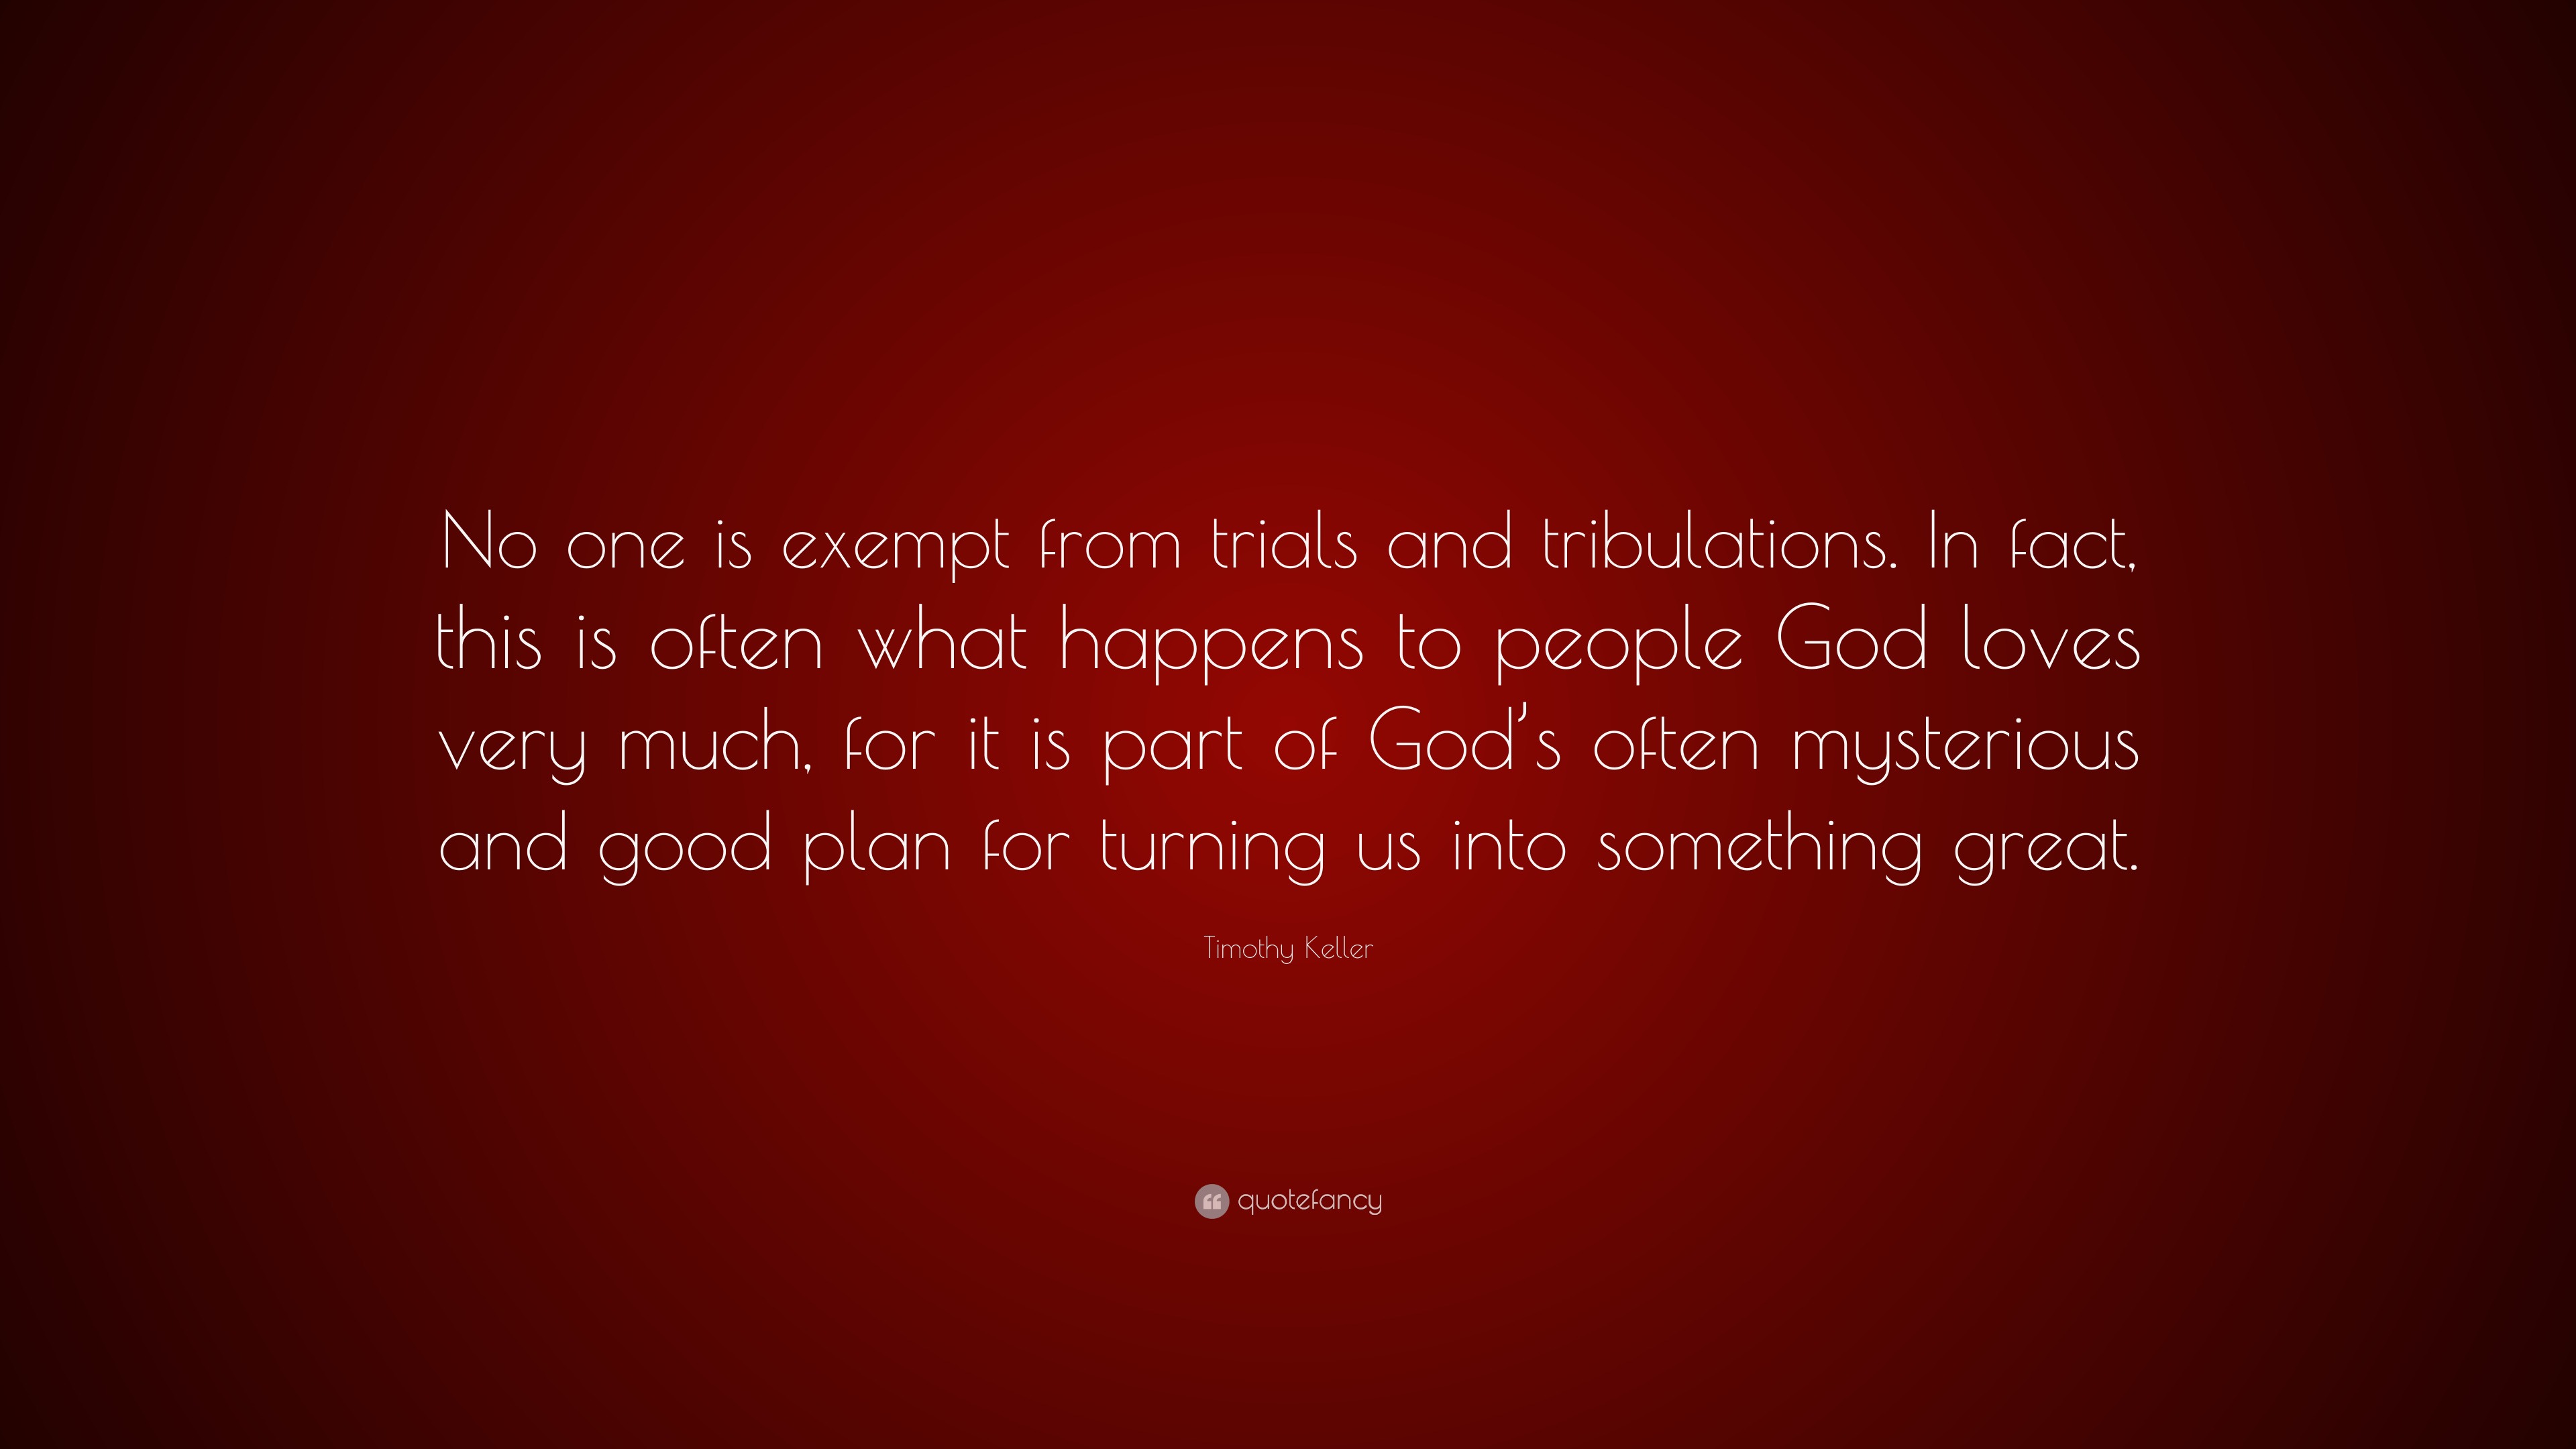 life trials and tribulations quotes timothy keller quote u201cno one is exempt from trials and